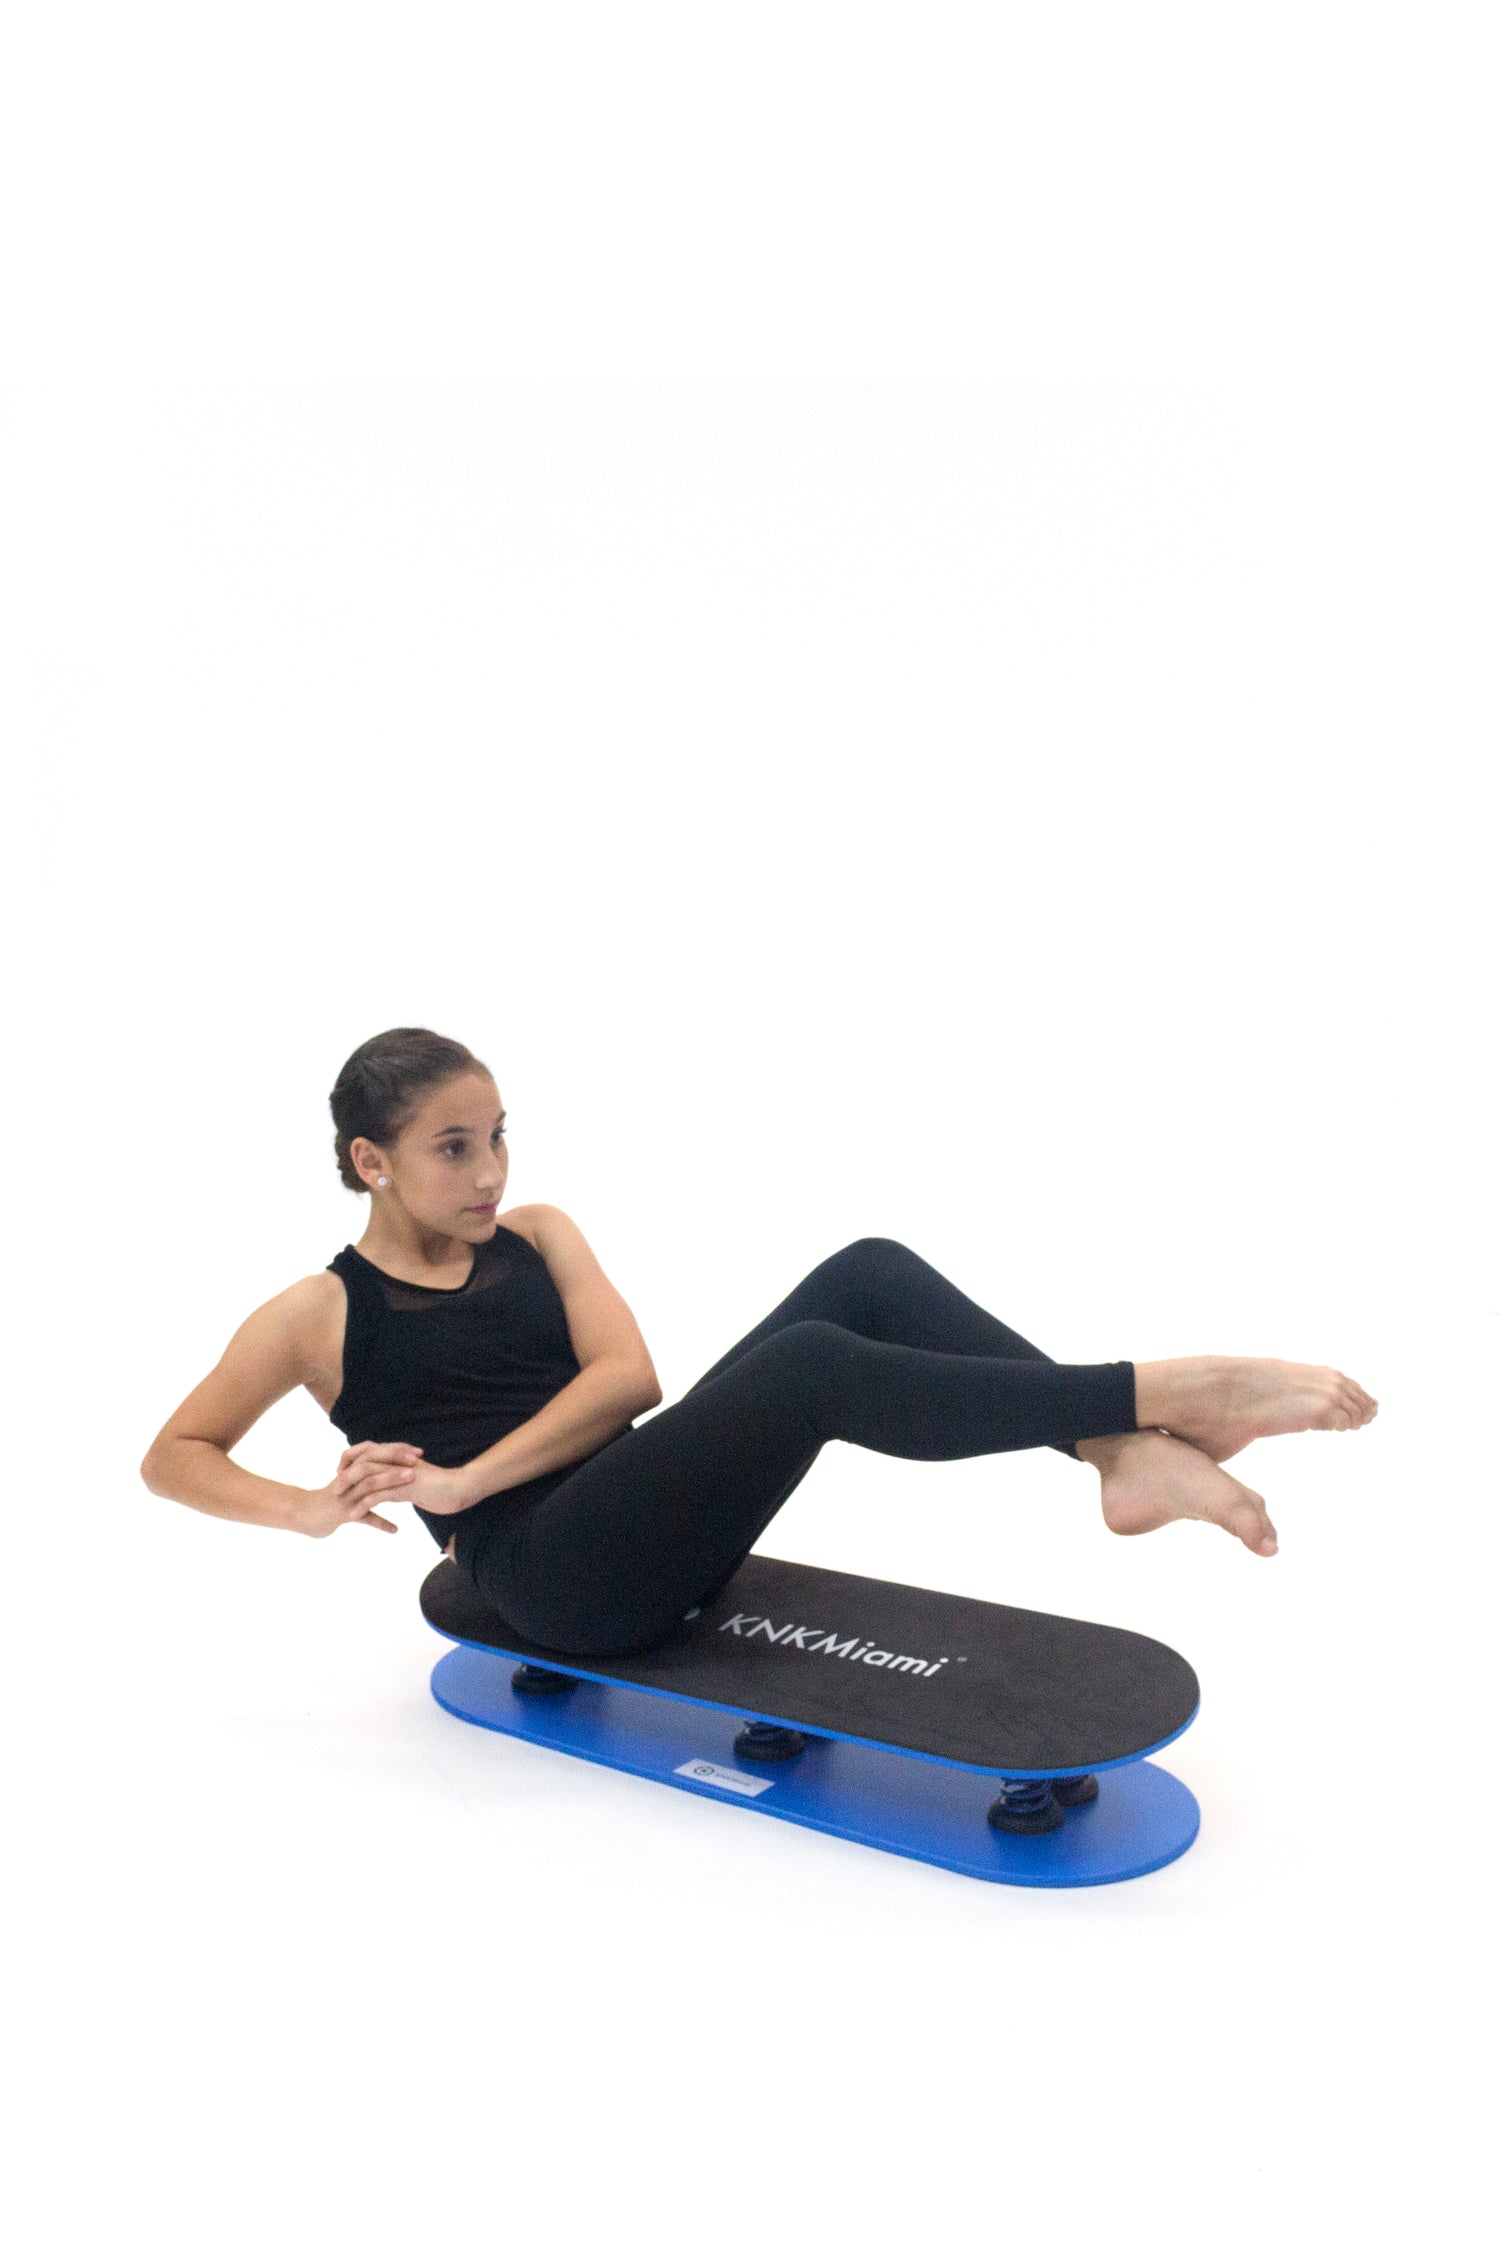 Buy Spring Core Balance Board - Limit 260 Pounds – KNKMiami